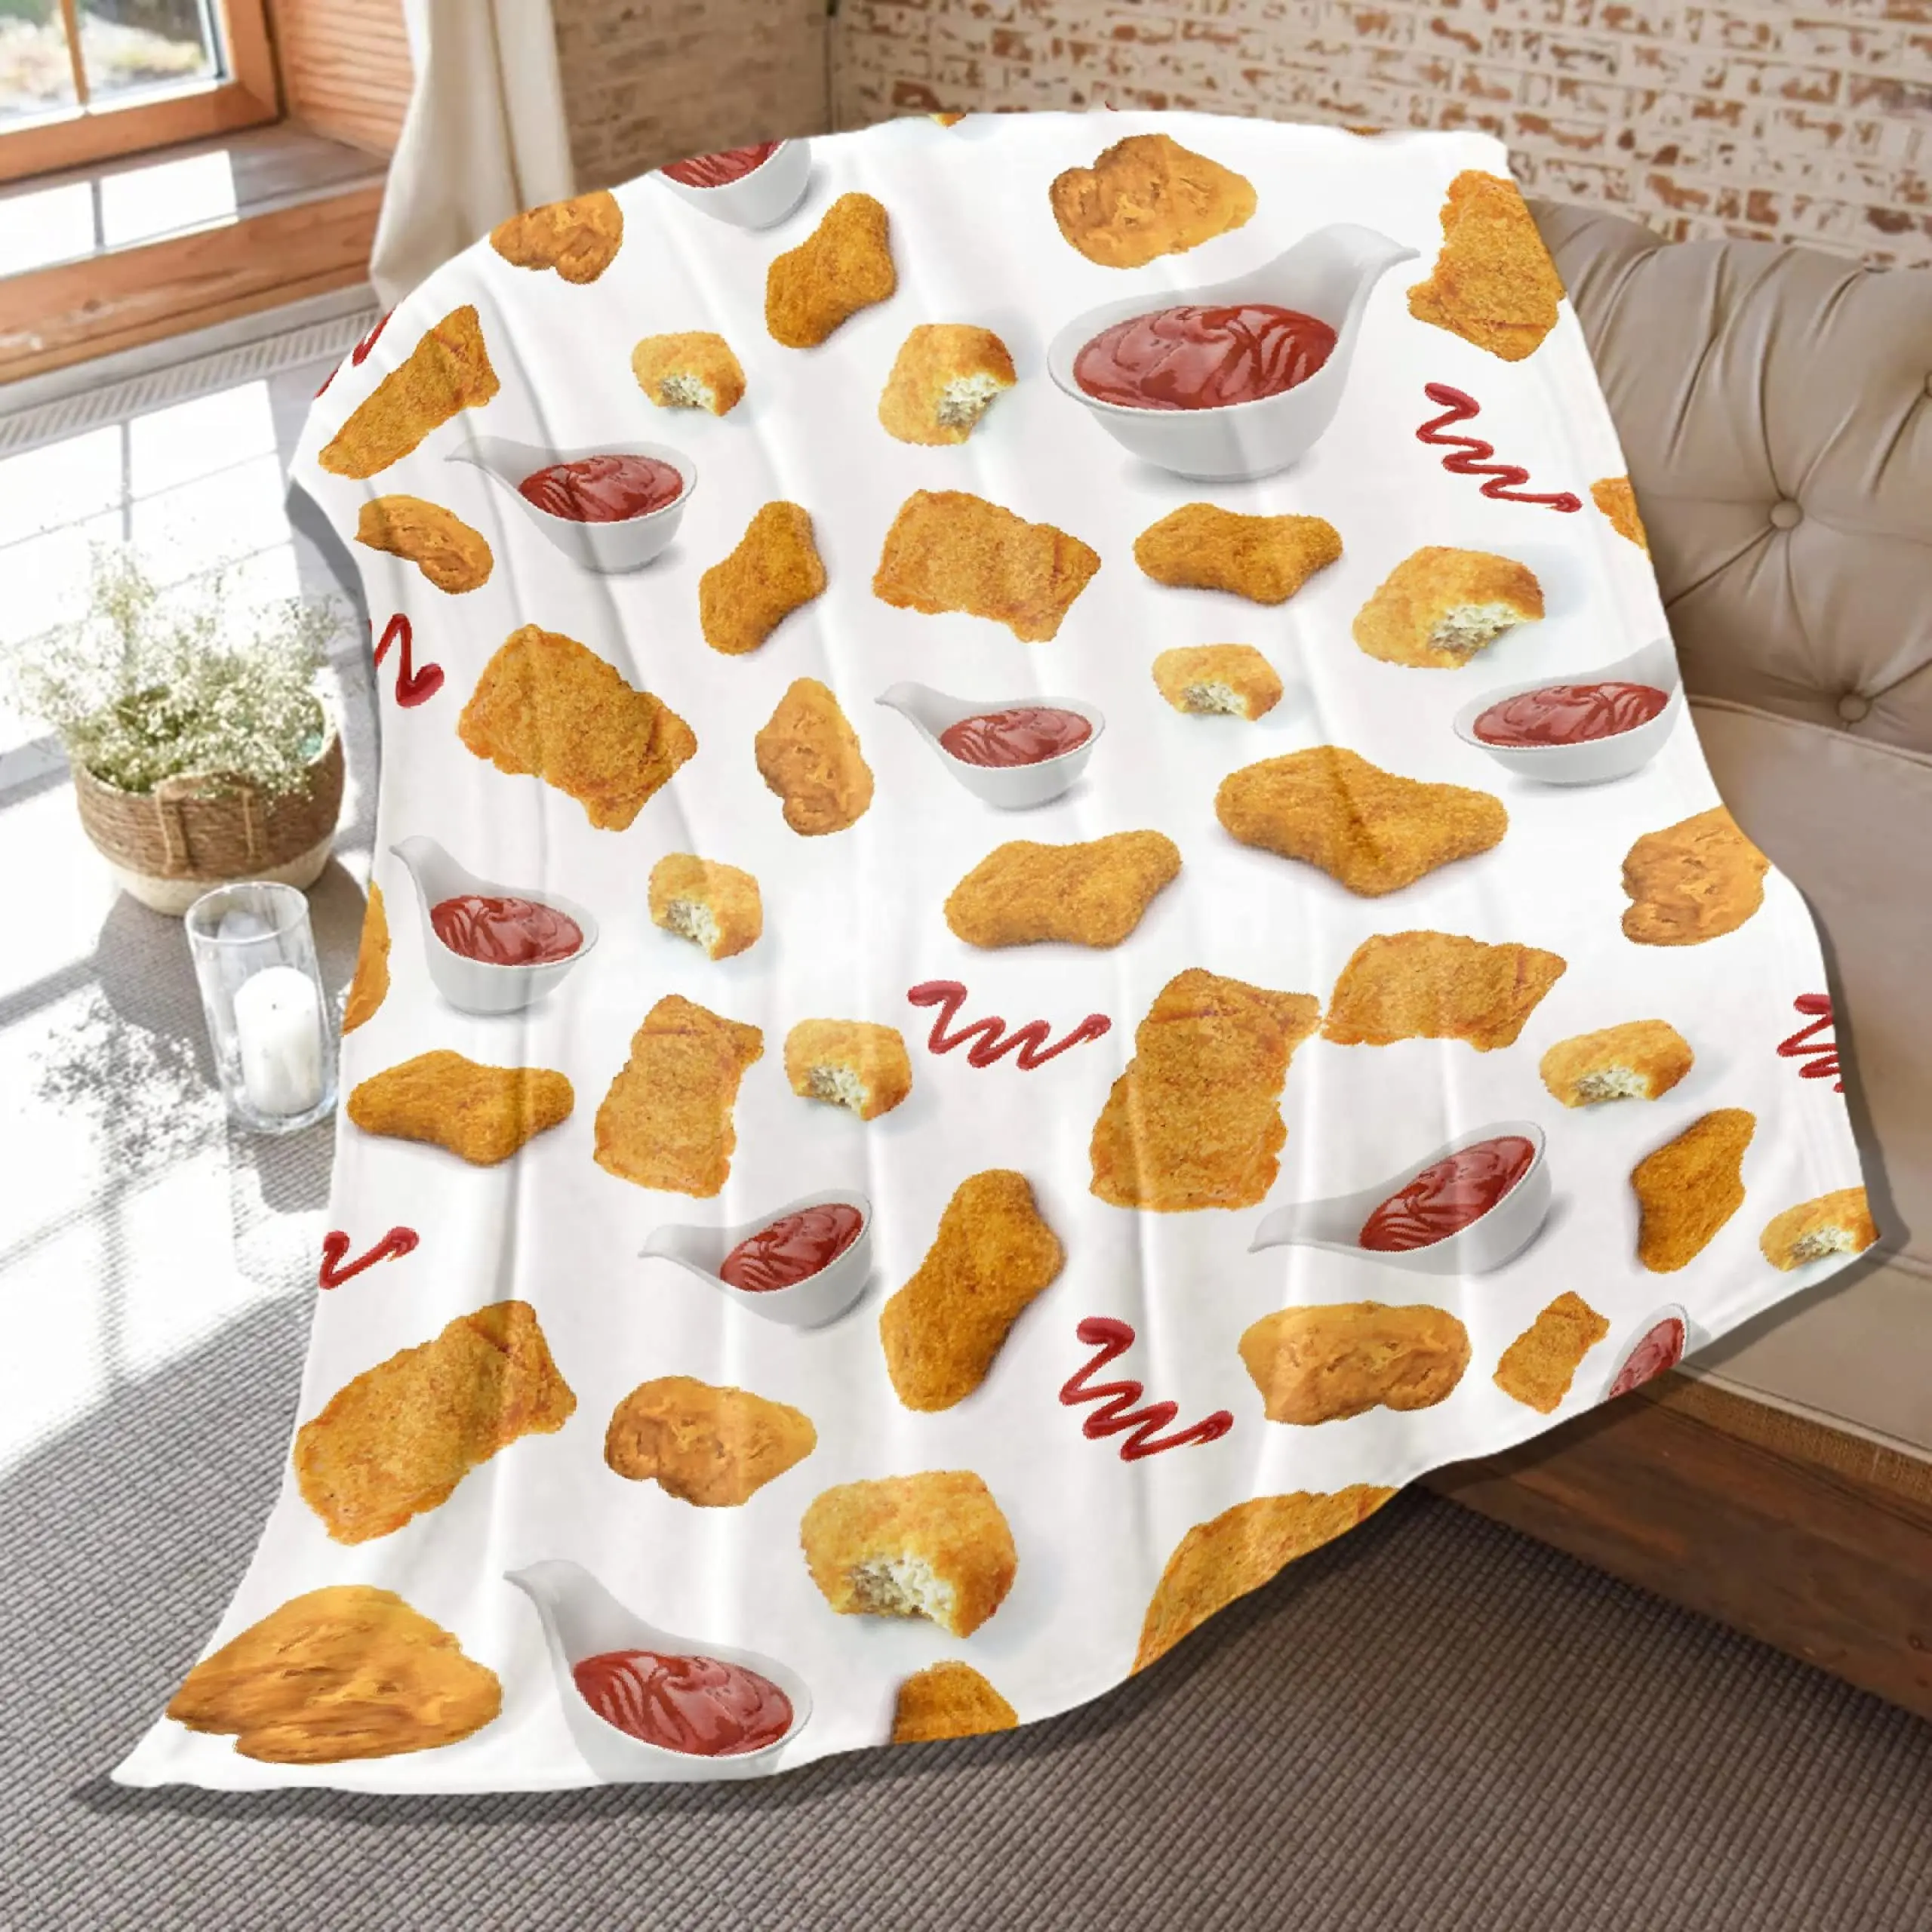 

Soft Food Blanket Pizza Noodles Lightweight Plush Flannel Quilt for Beach Couch Bed Sofa Throw Blanket Birthday Gift Women Men